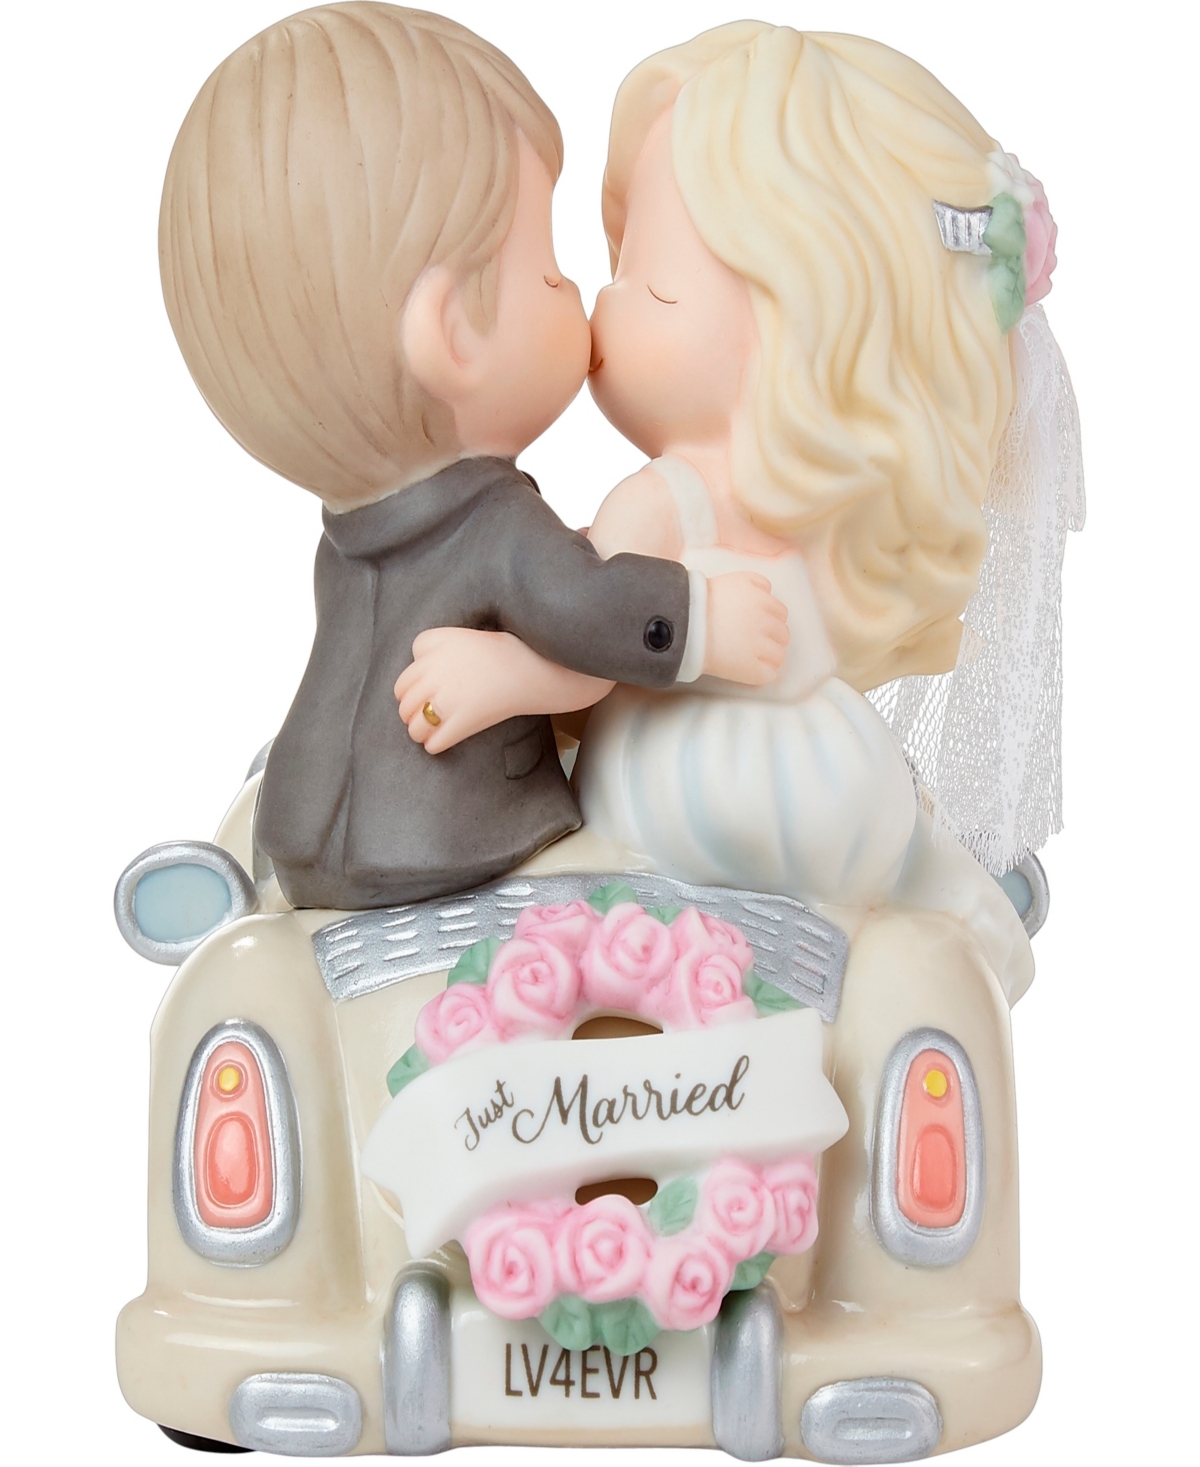 Precious Moments 222011 On The Road To Forever Bisque Porcelain And Fabric Figurine In Multicolored